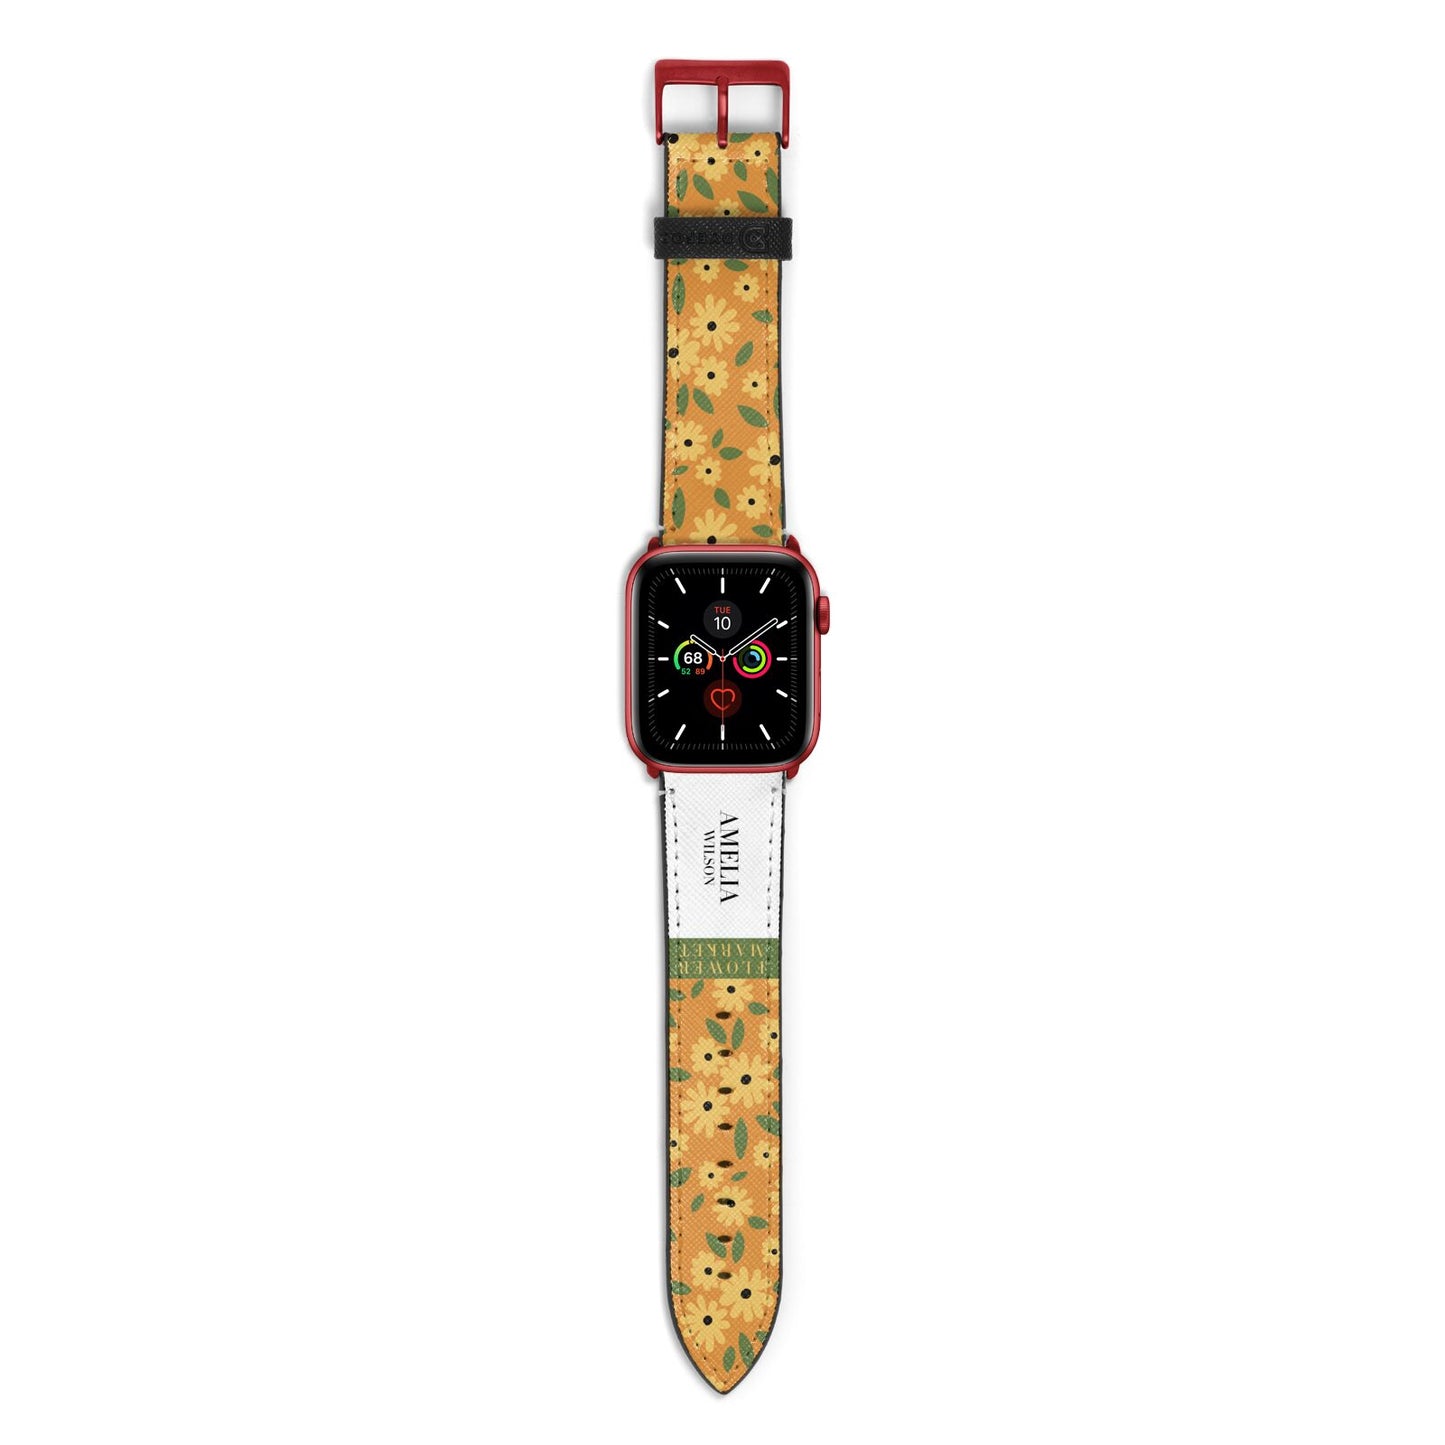 California Flower Market Apple Watch Strap with Red Hardware